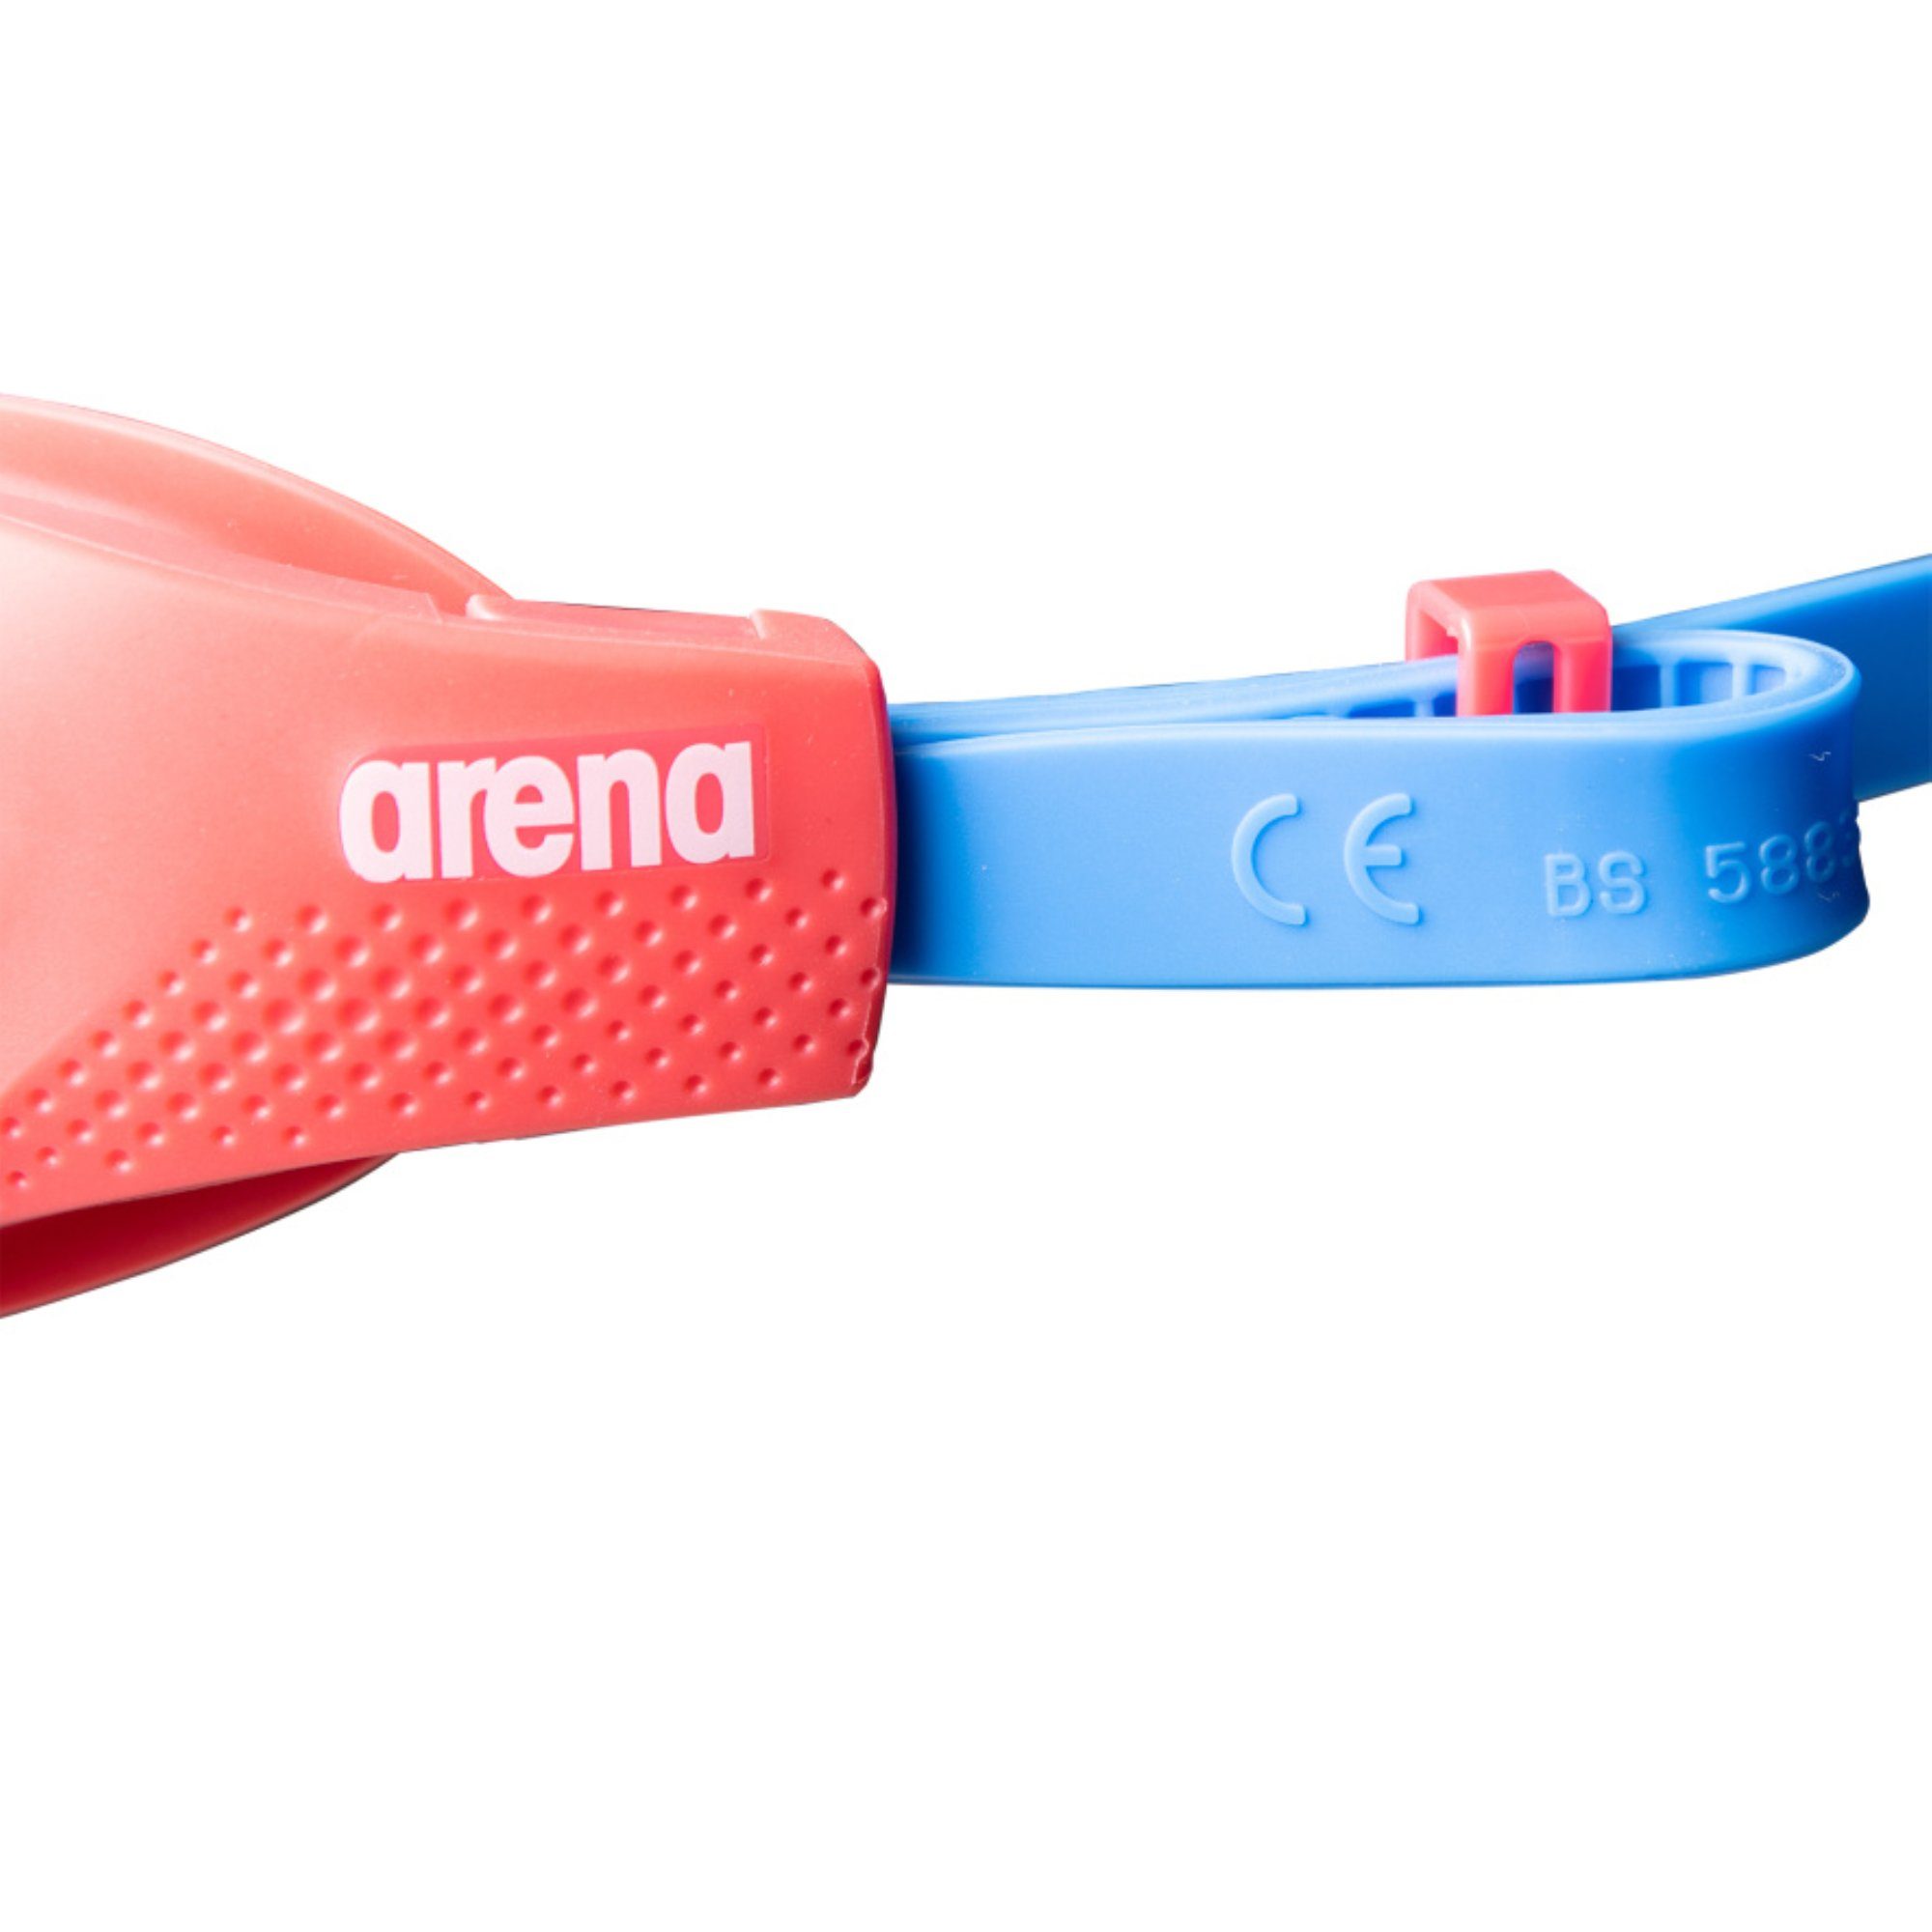 The blue-red-blue One Arena light Junior arena Schwimmbrille